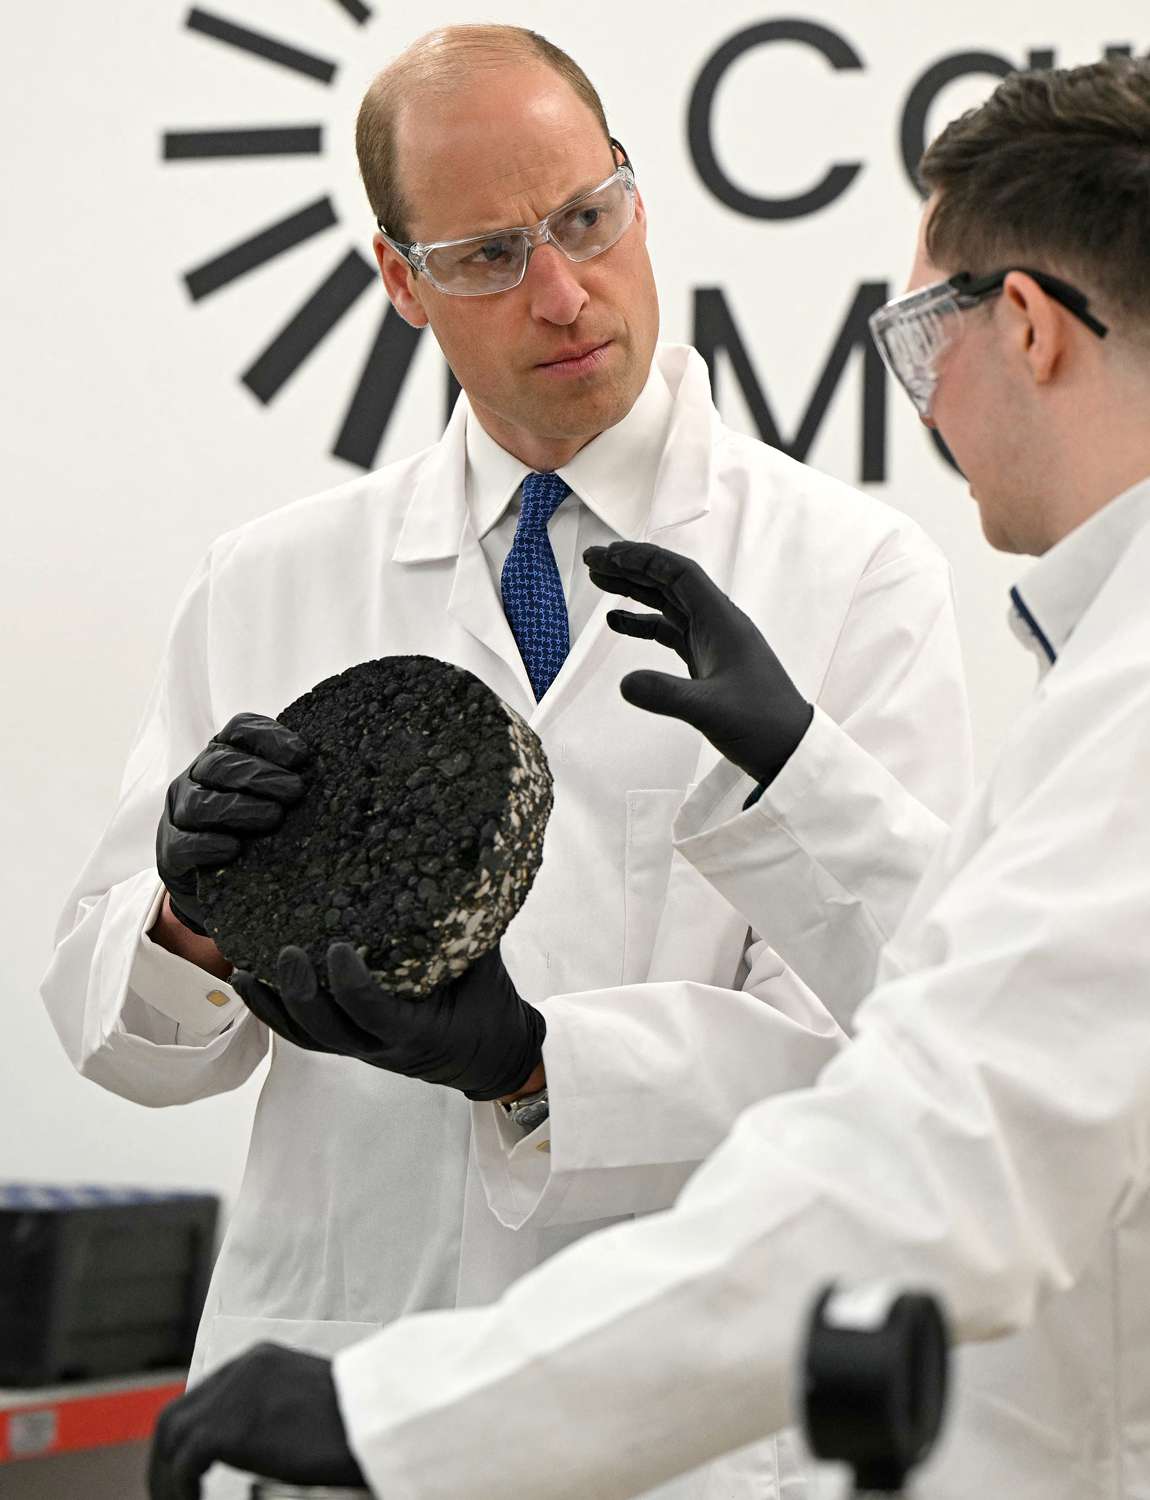 Prince William, Prince of Wales reacts as he is shown a sample of low carbon tarmac during his visit to visit Low Carbon Materials in Seaham, 